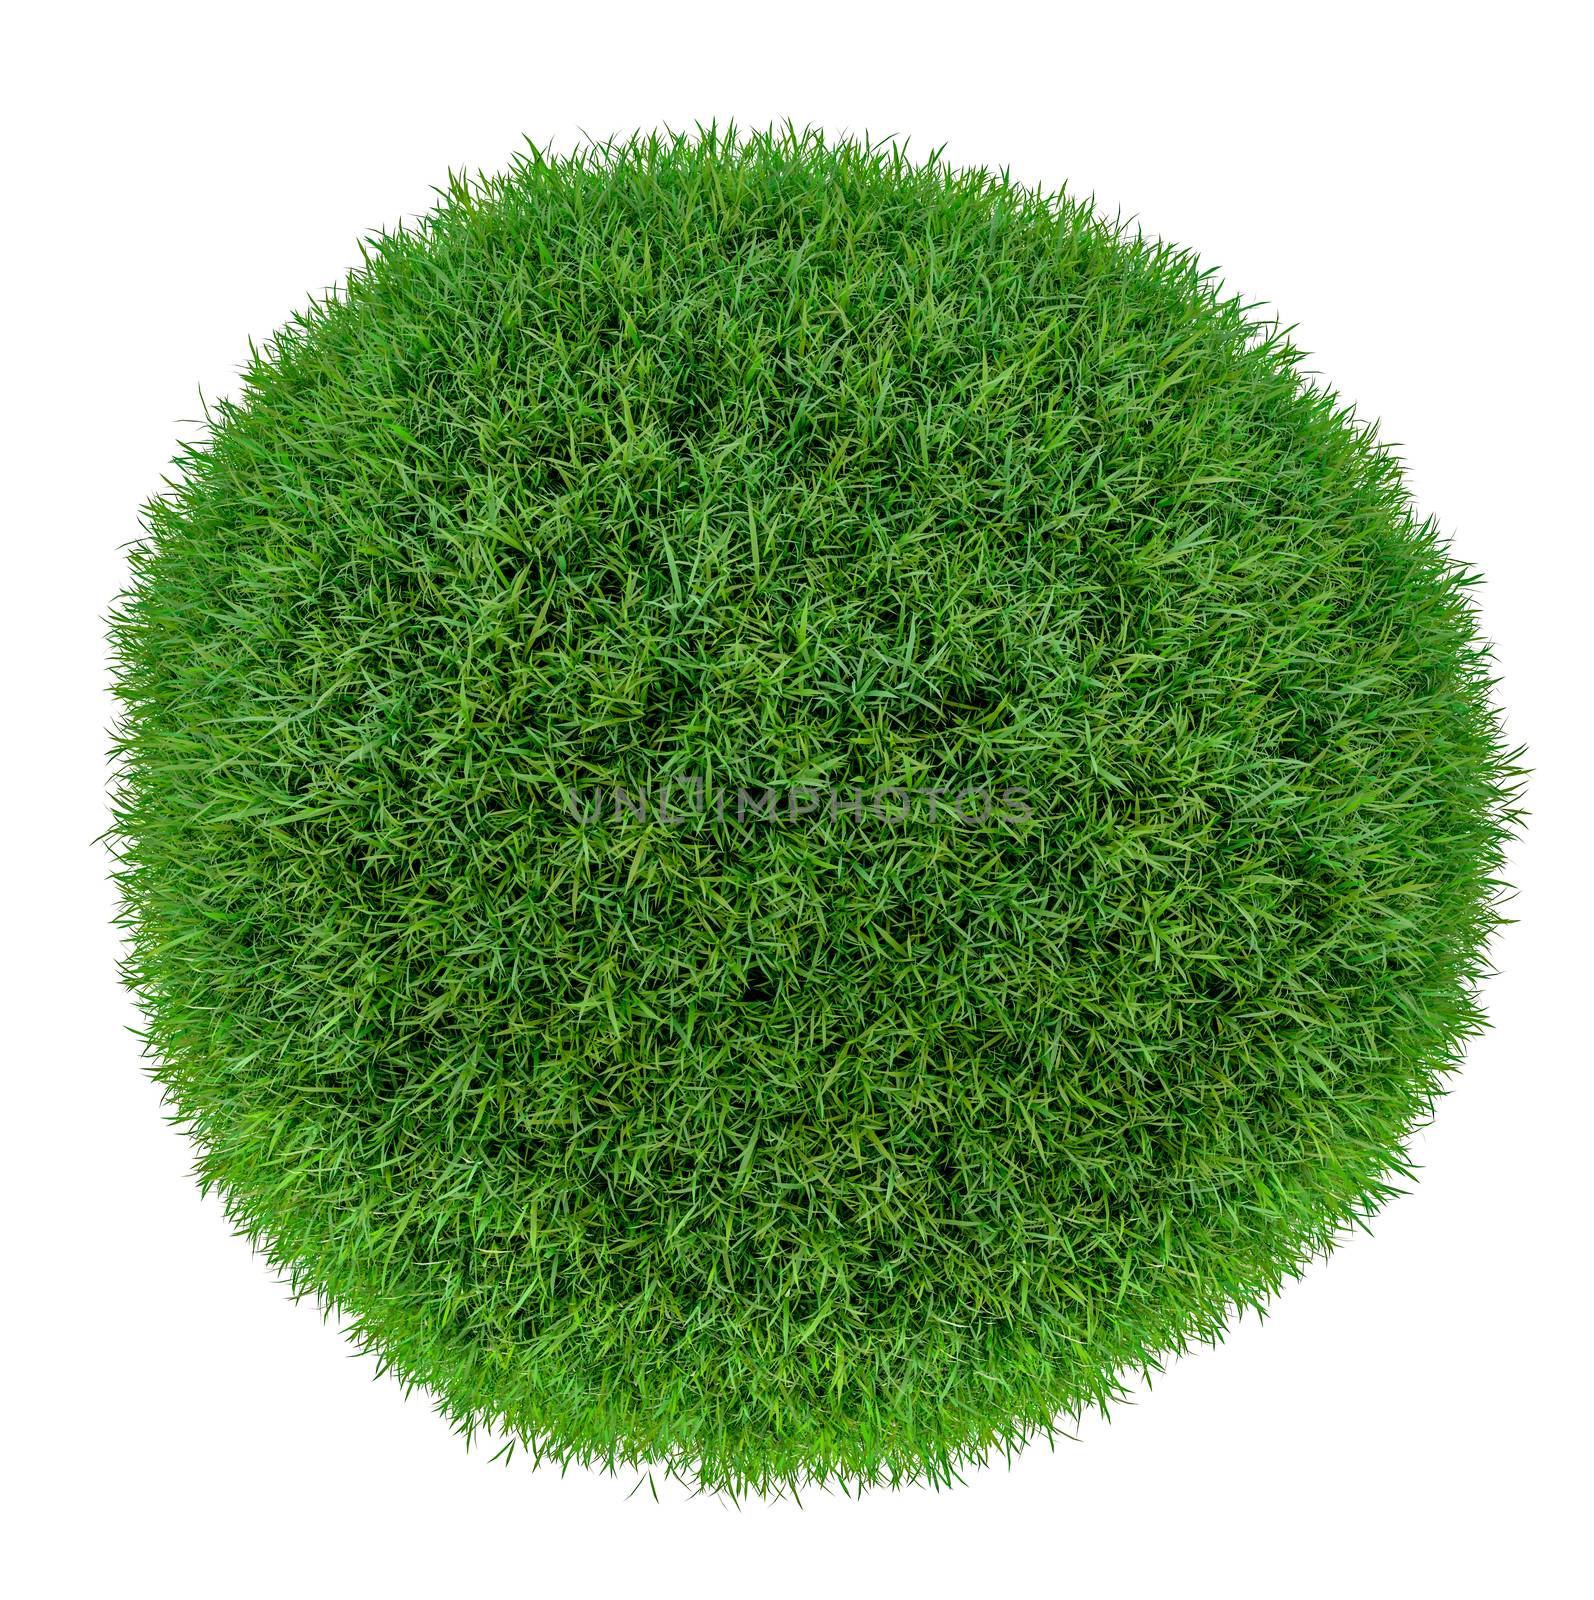 Green grass ball. Isolated on white. 3D illustration